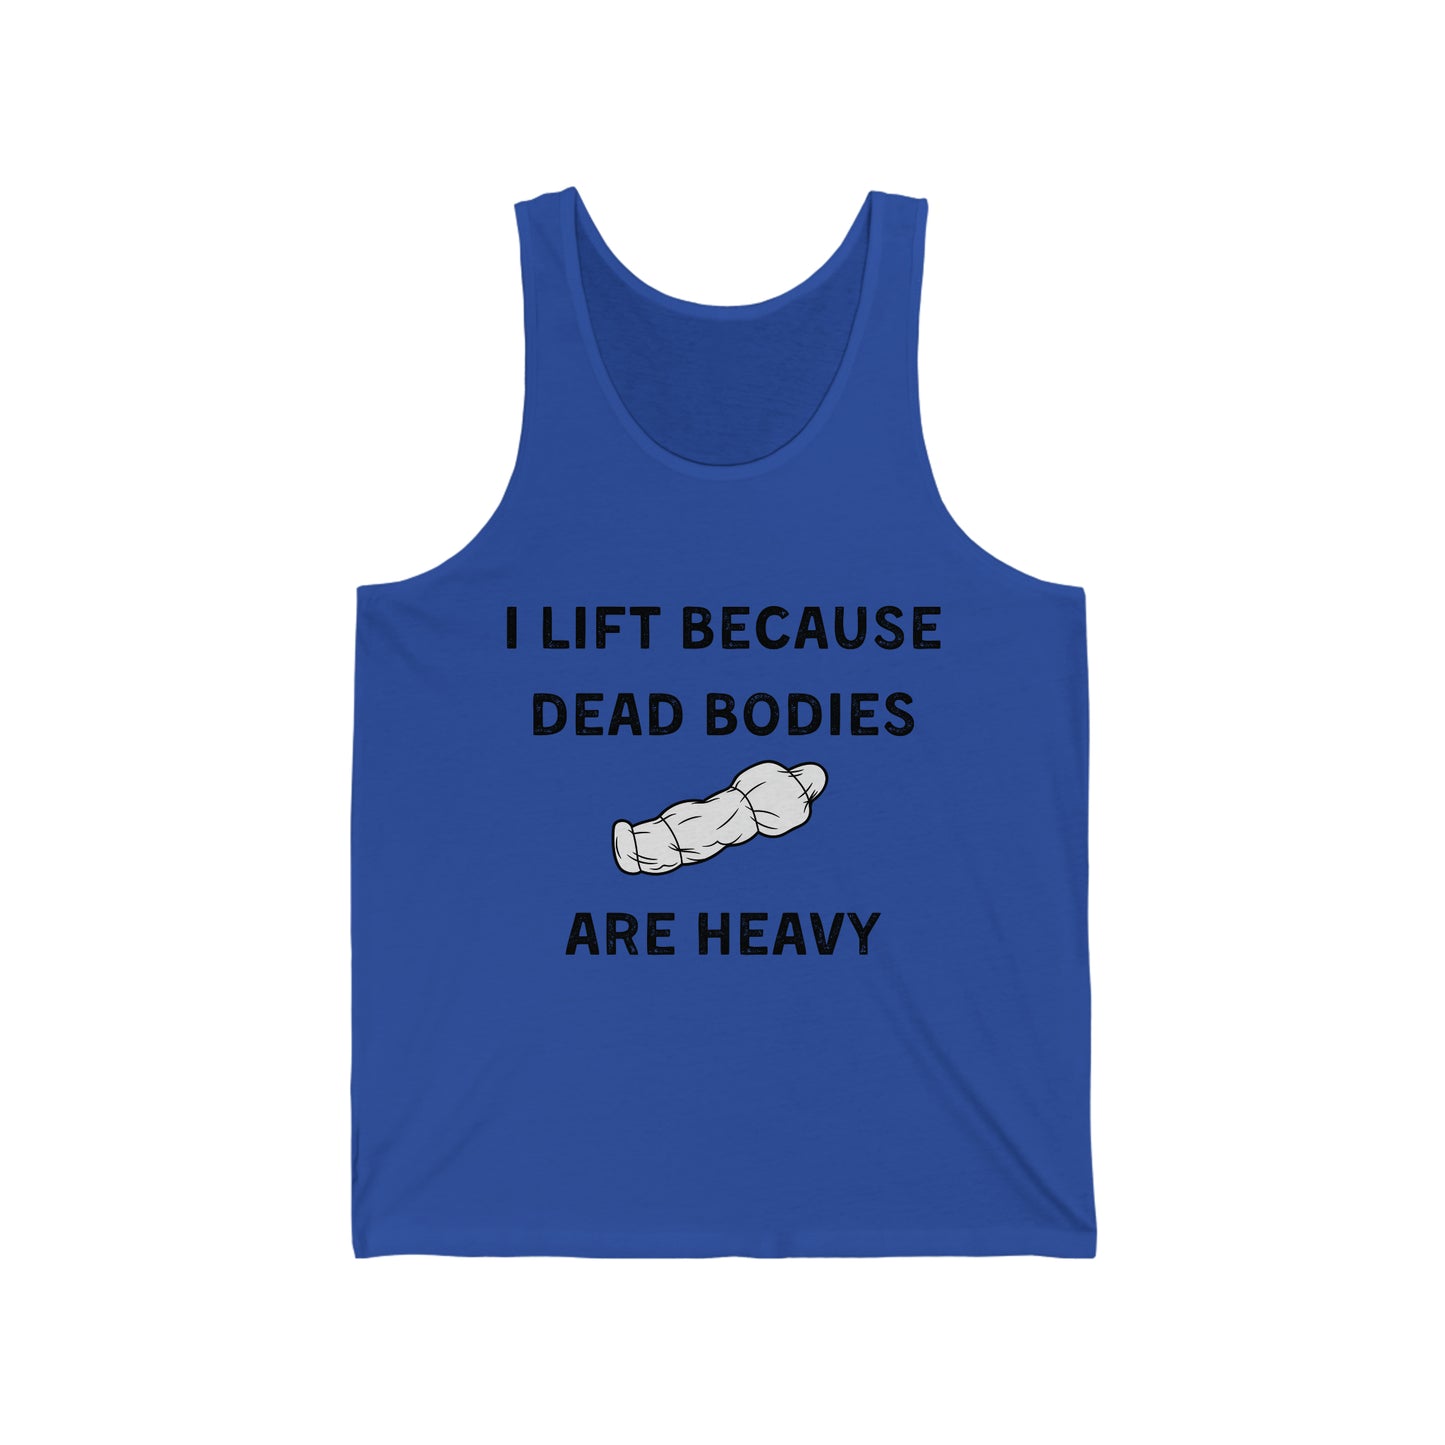 I lift because dead bodies are heavy